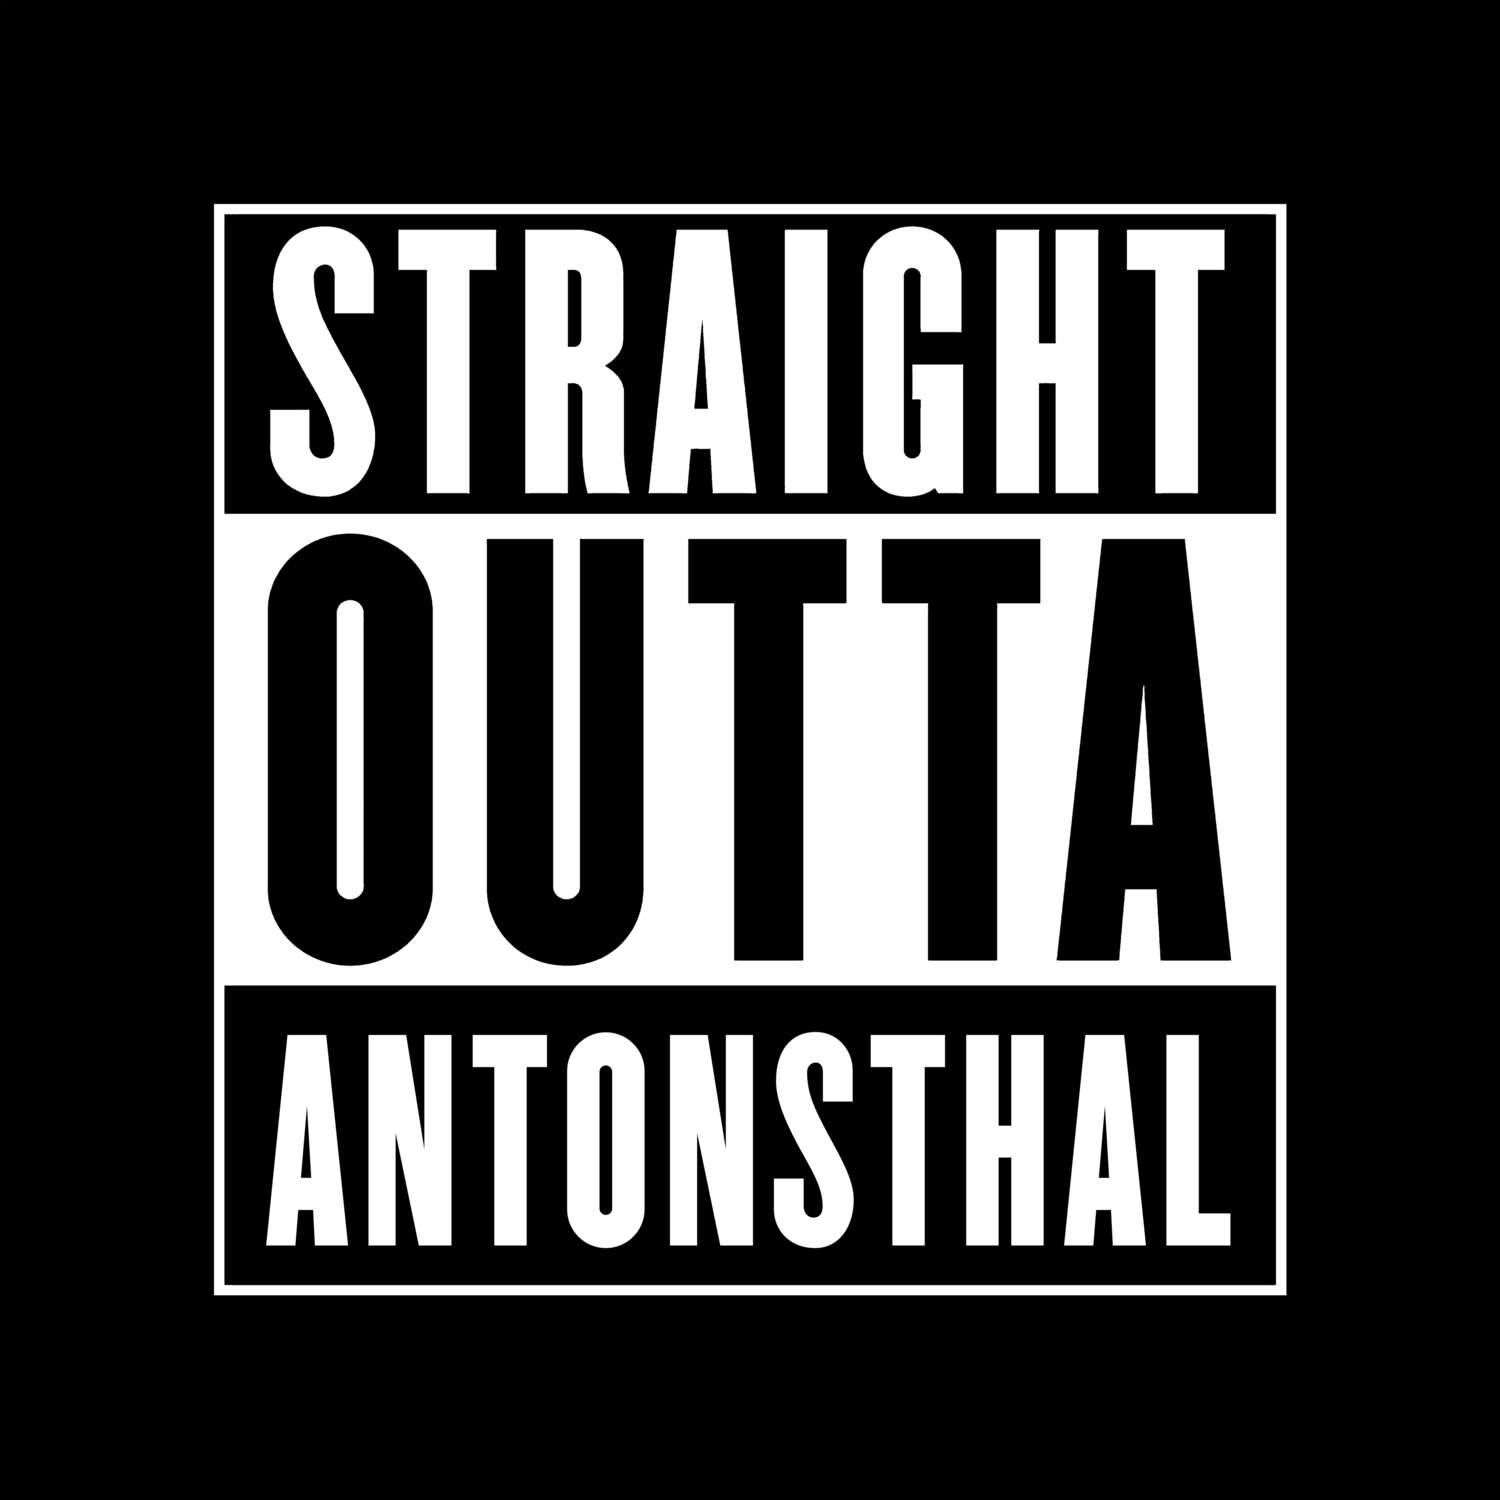 Antonsthal T-Shirt »Straight Outta«